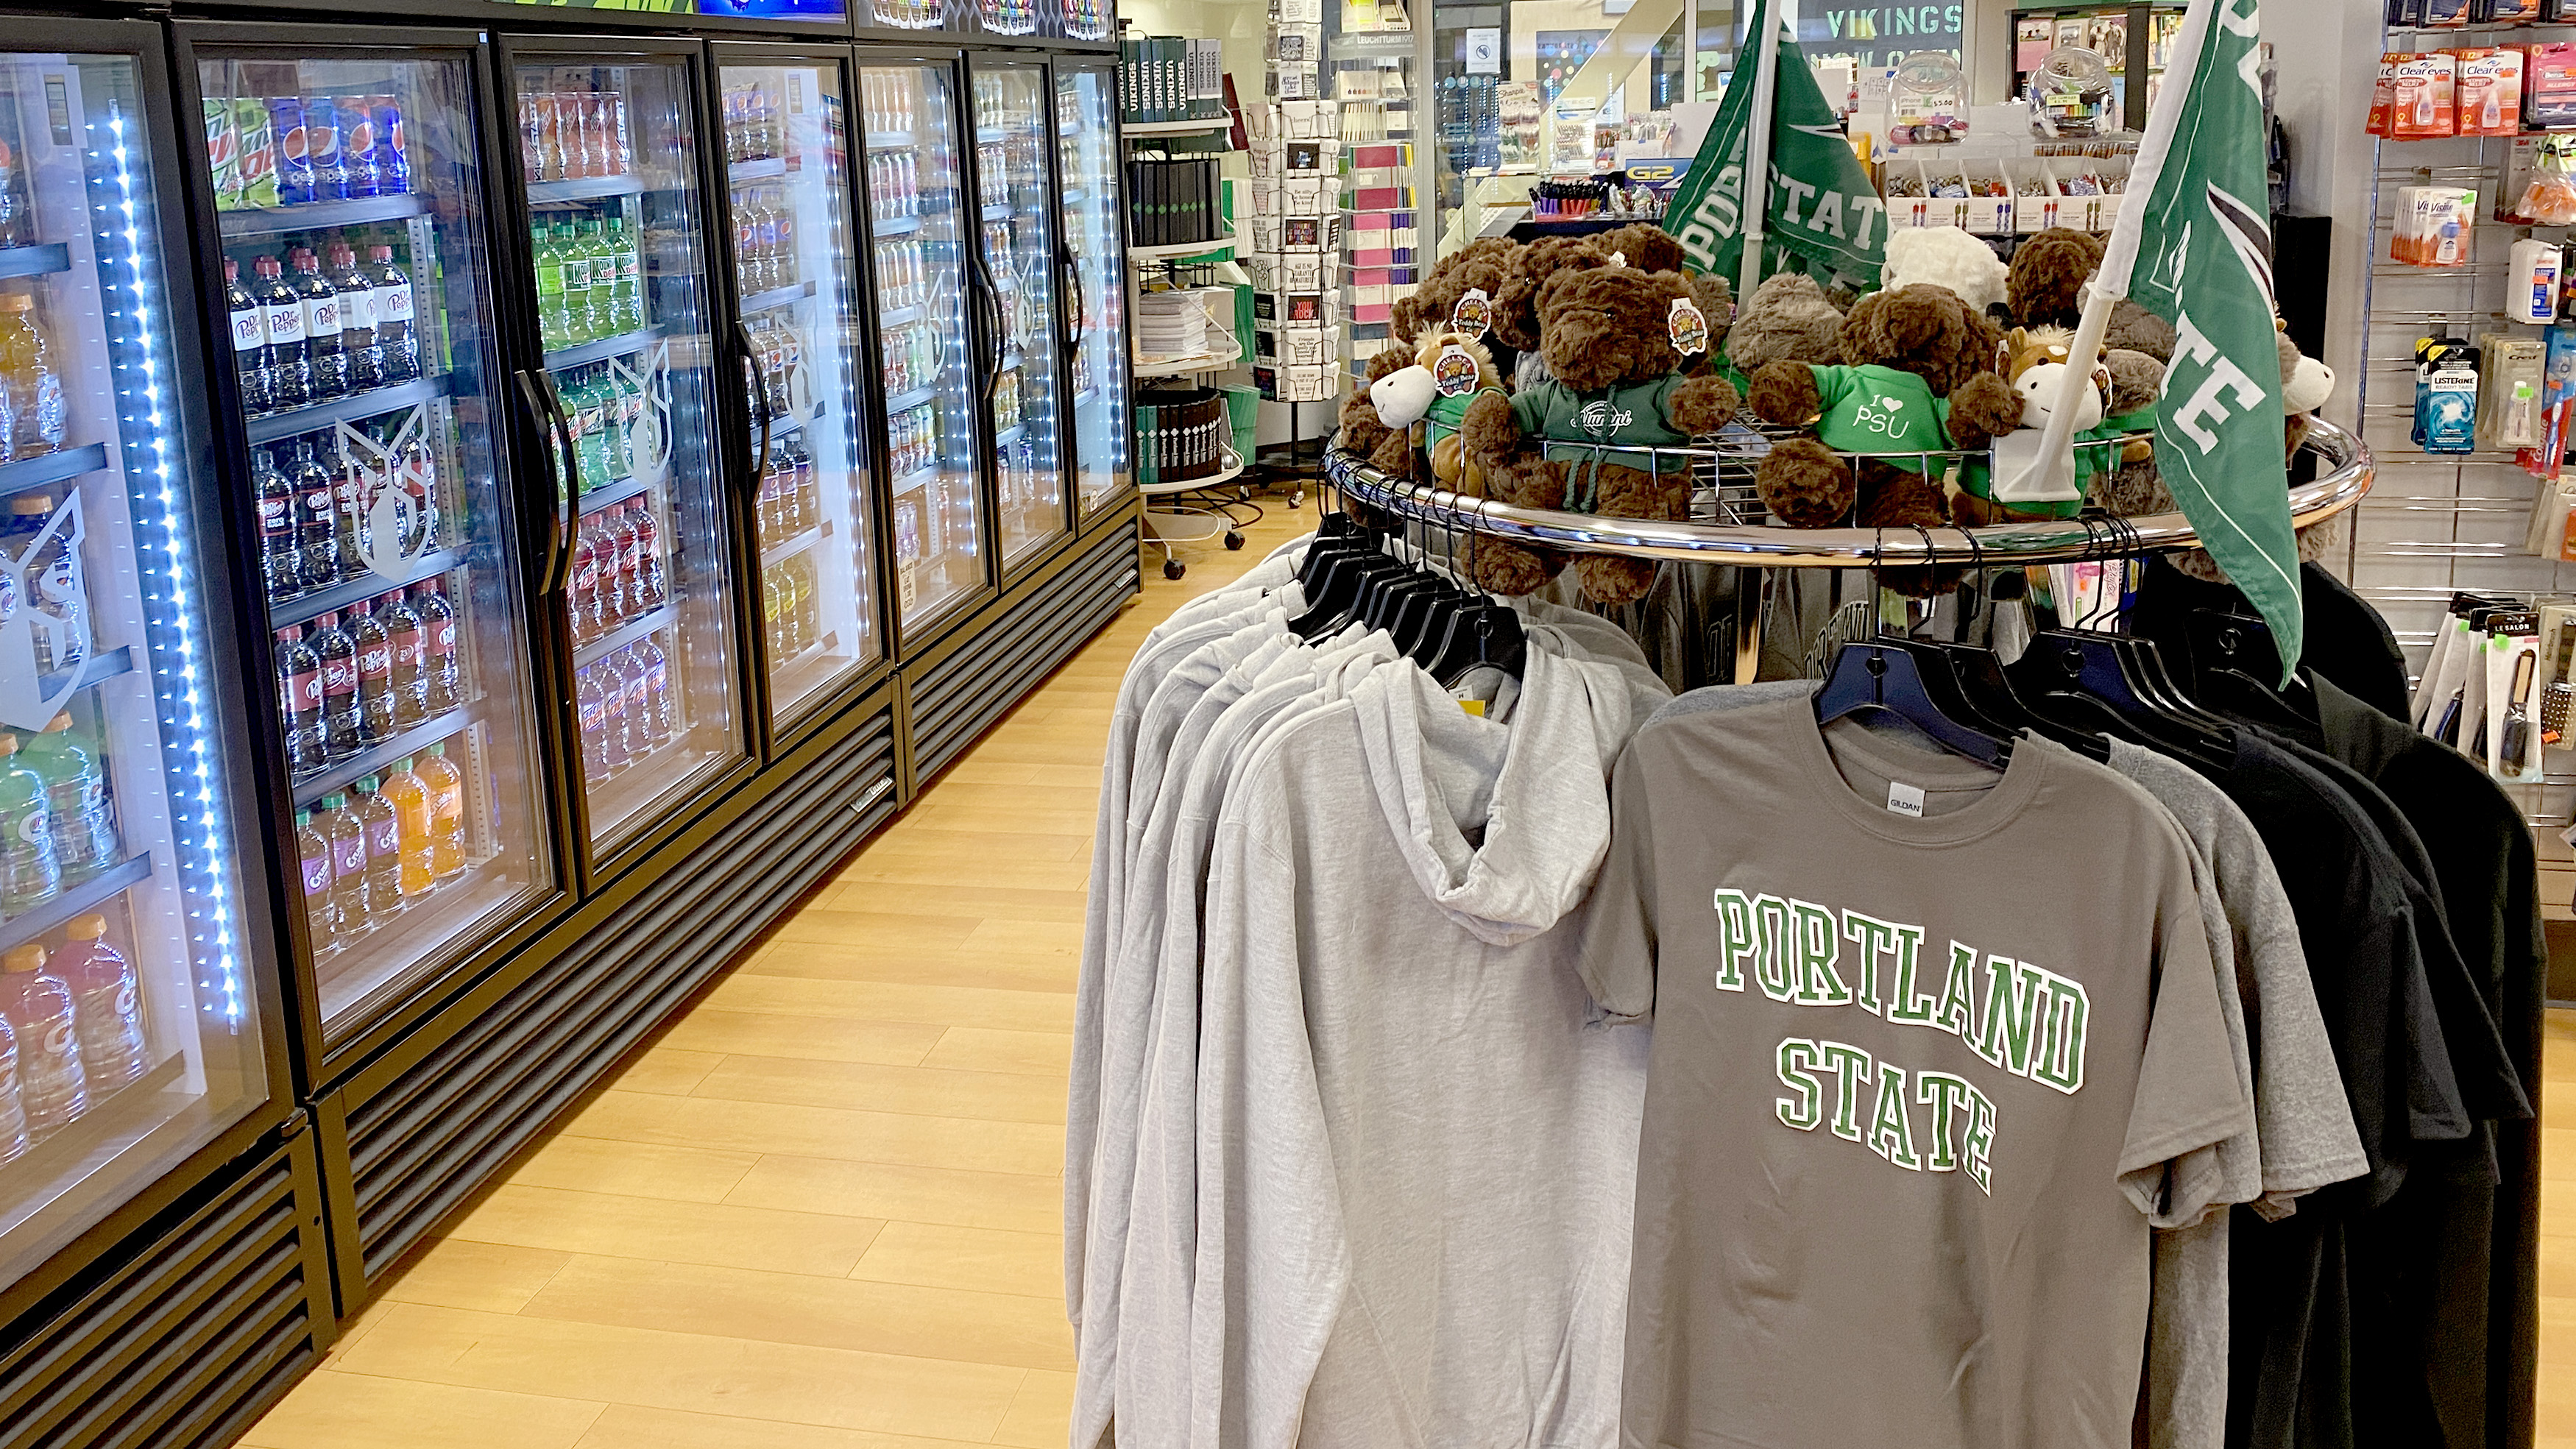 T-shirts, P S U gear and chilled beverages on display in the University Market in Smith.